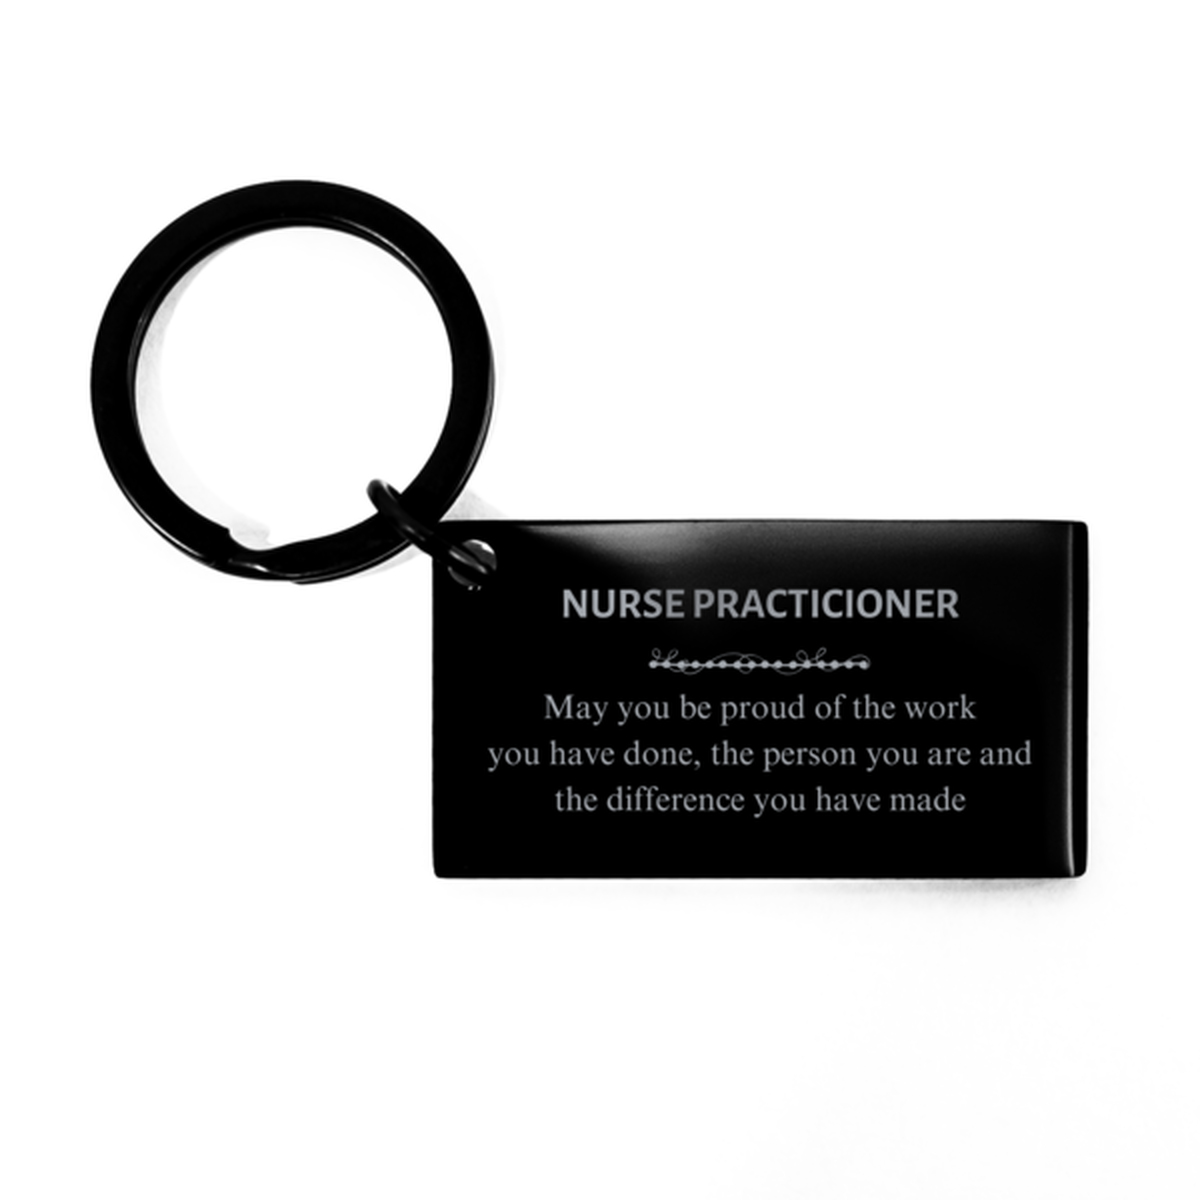 Personal Trainer May you be proud of the work you have done, Retirement Nurse Practicioner Keychain for Colleague Appreciation Gifts Amazing for Nurse Practicioner